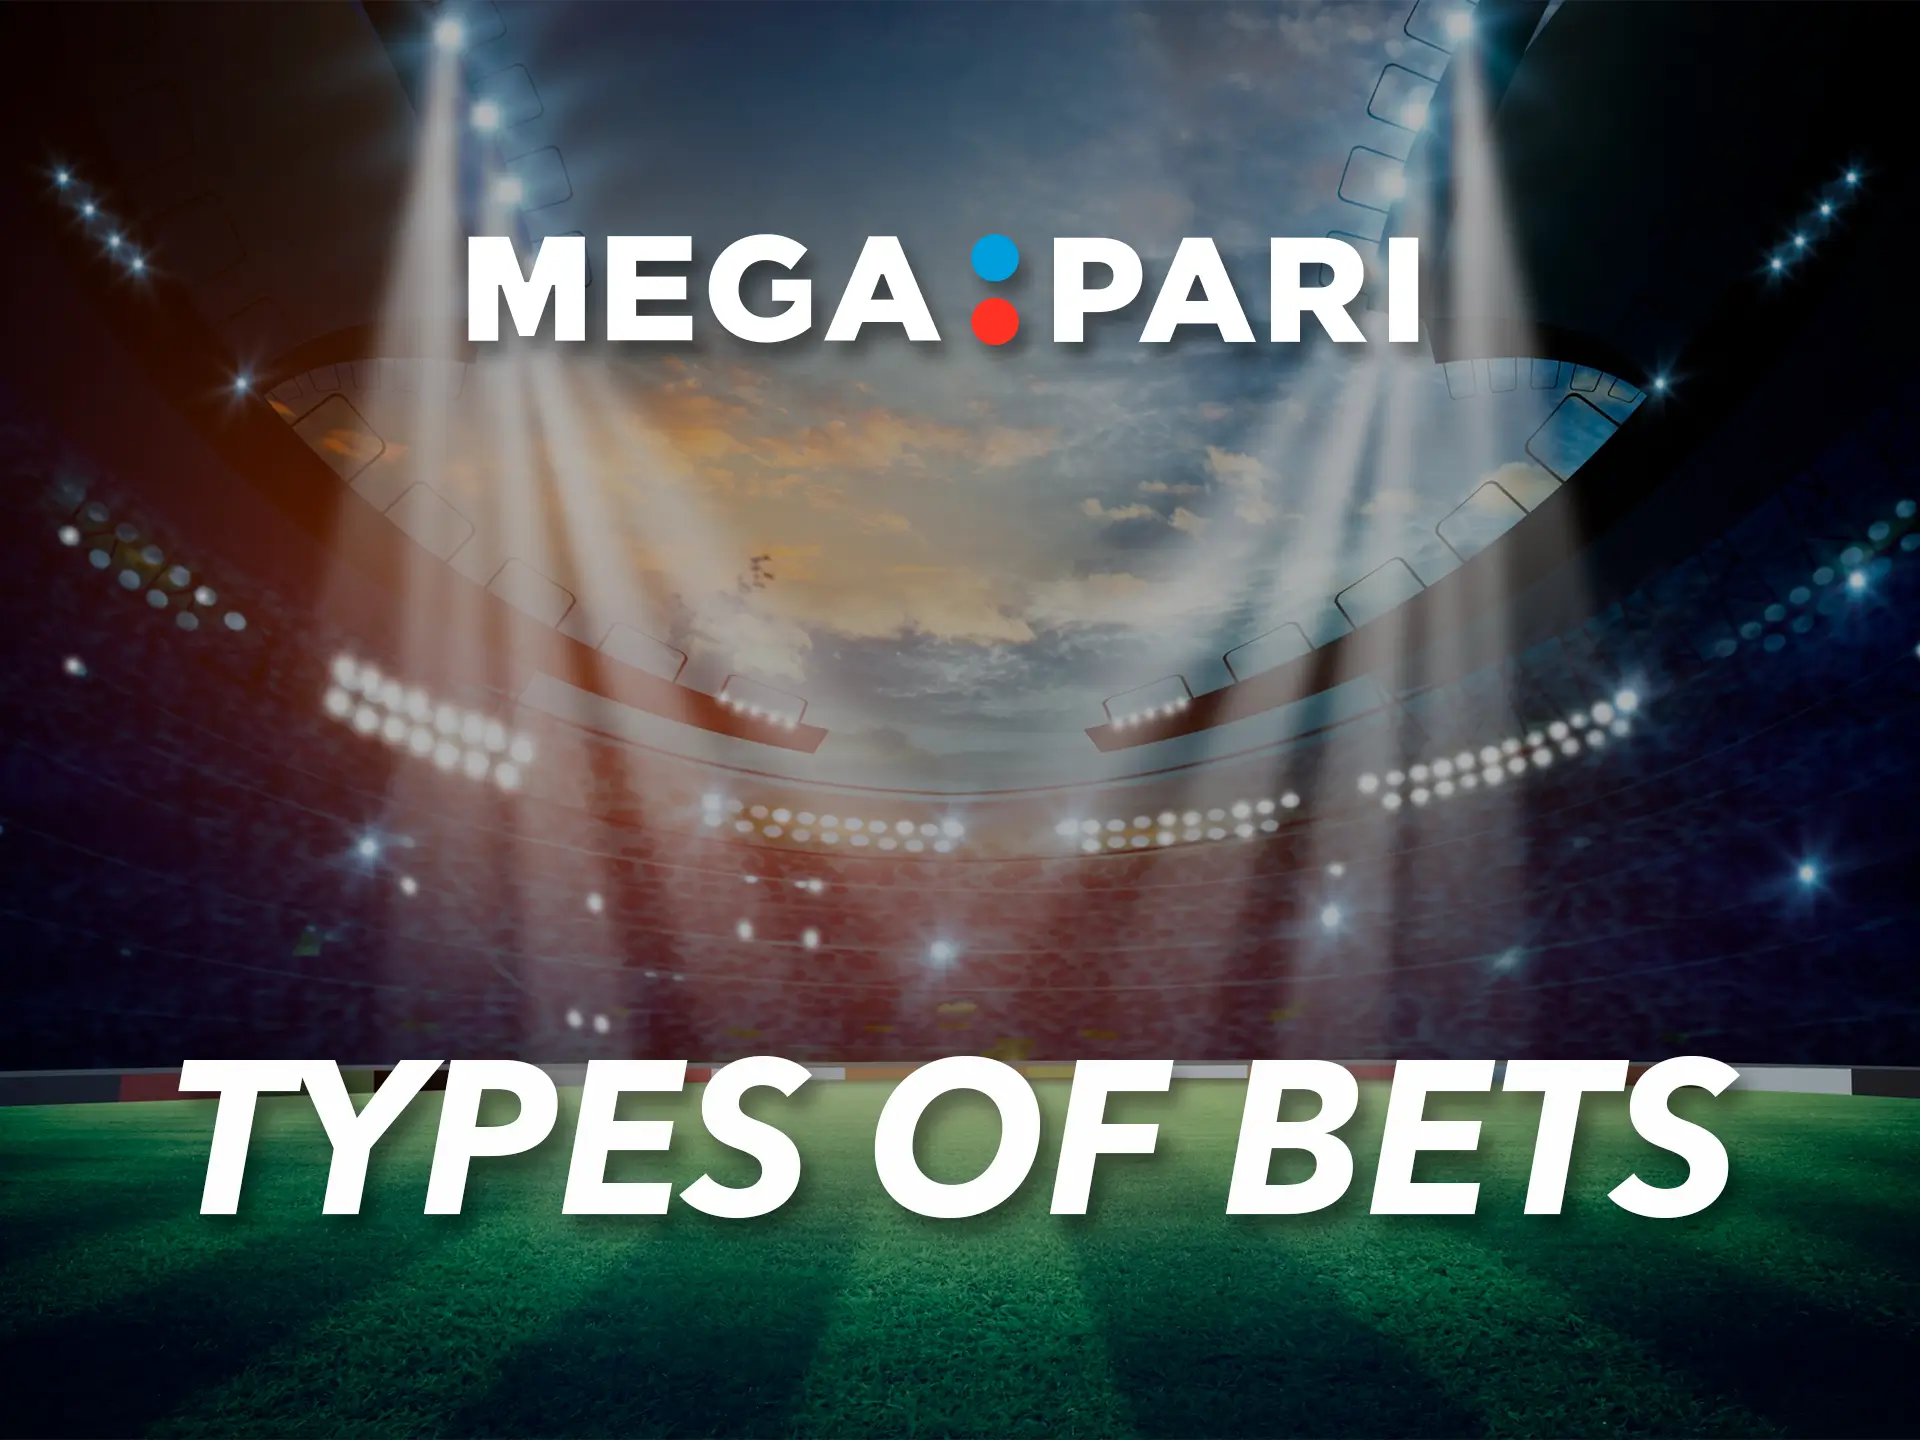 The variety of betting at Megapari gives customers different options to win.